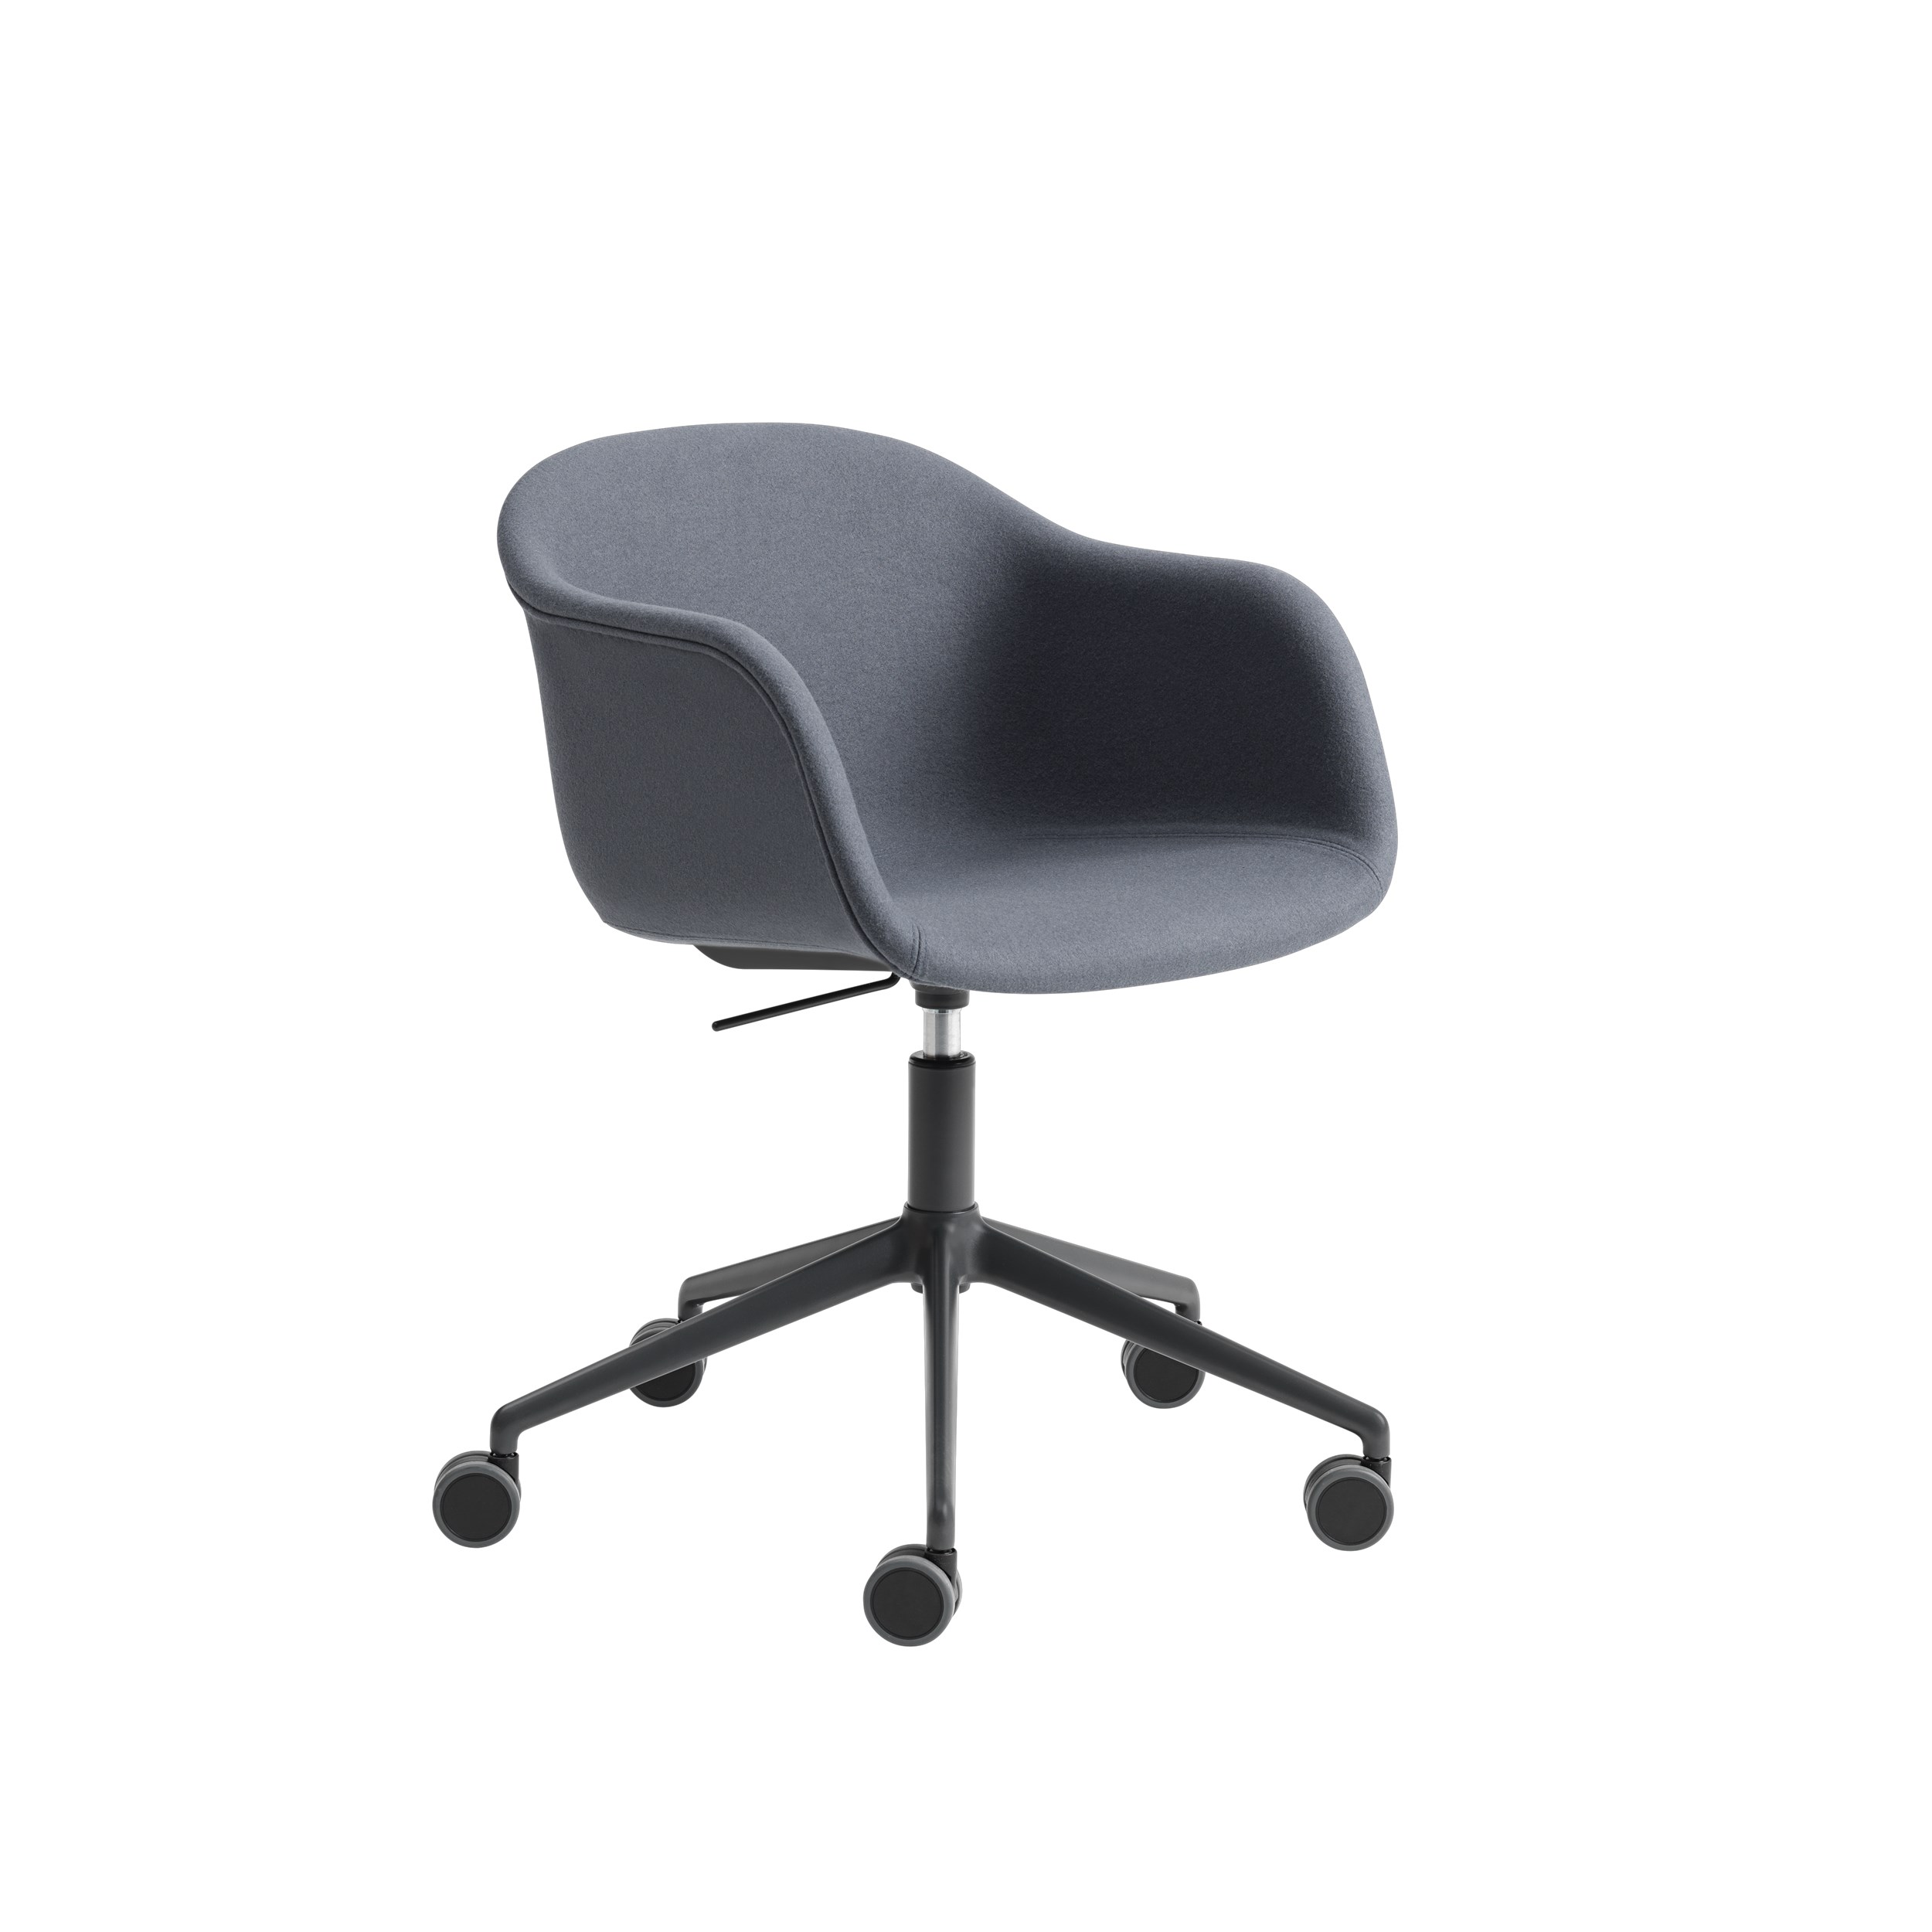 Fiber Swivel Armchair with castors and gas lift